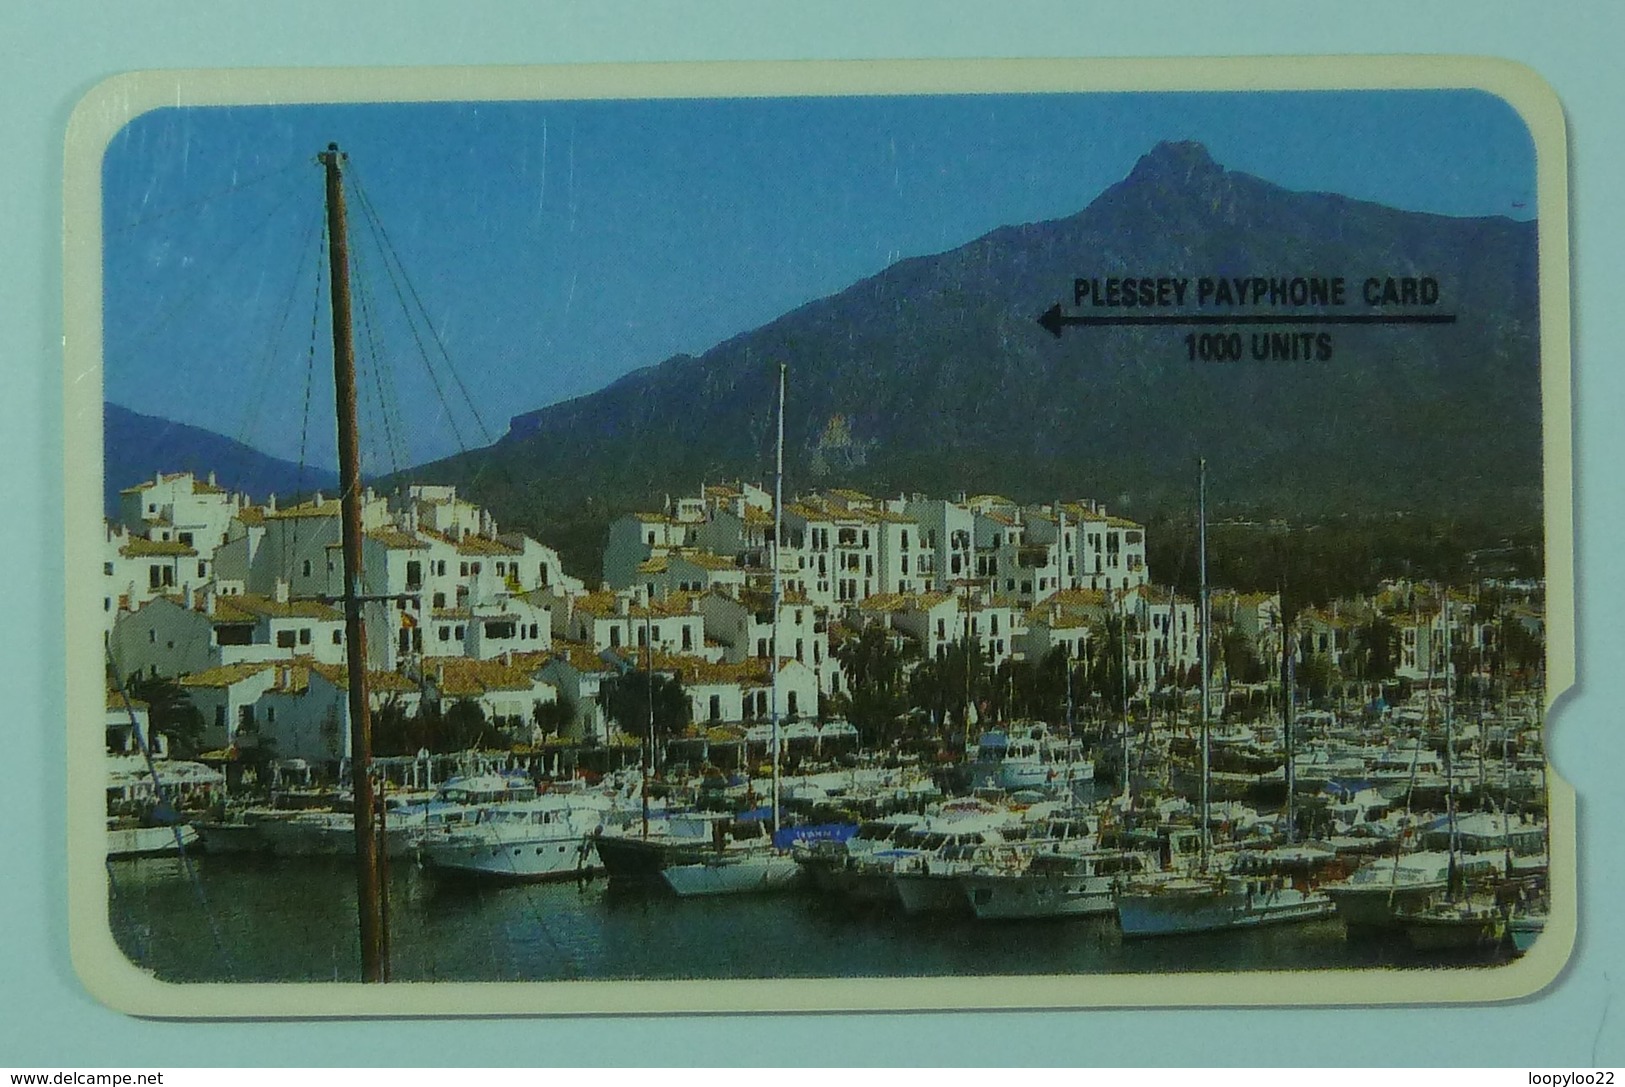 SPAIN - GPT - Plessey Test / Demo - 1987 - Cadaques Village Girona - Used - Tests & Service